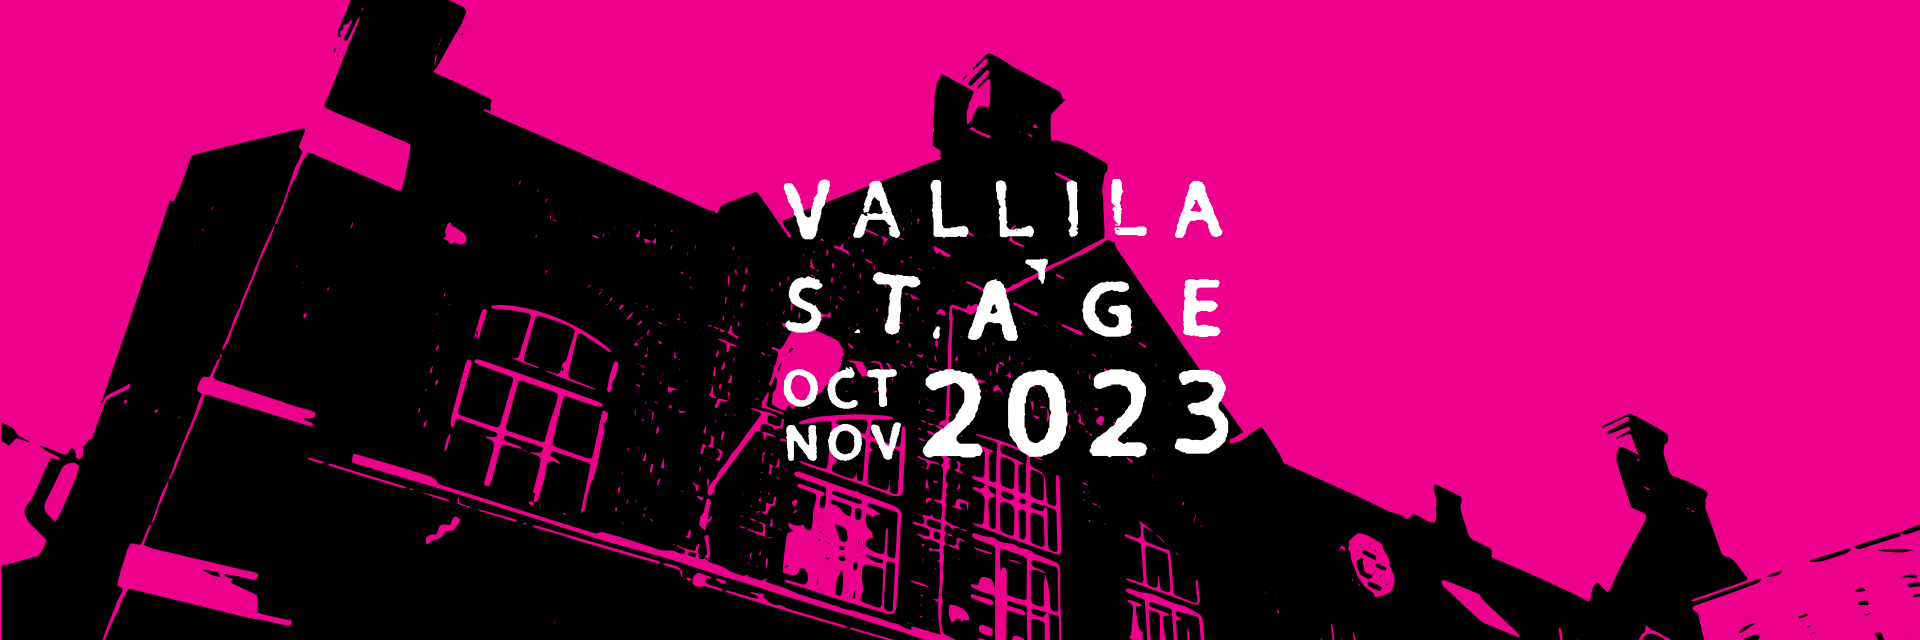 Pink background with white text saying Vallila stage, oct-nov 2023